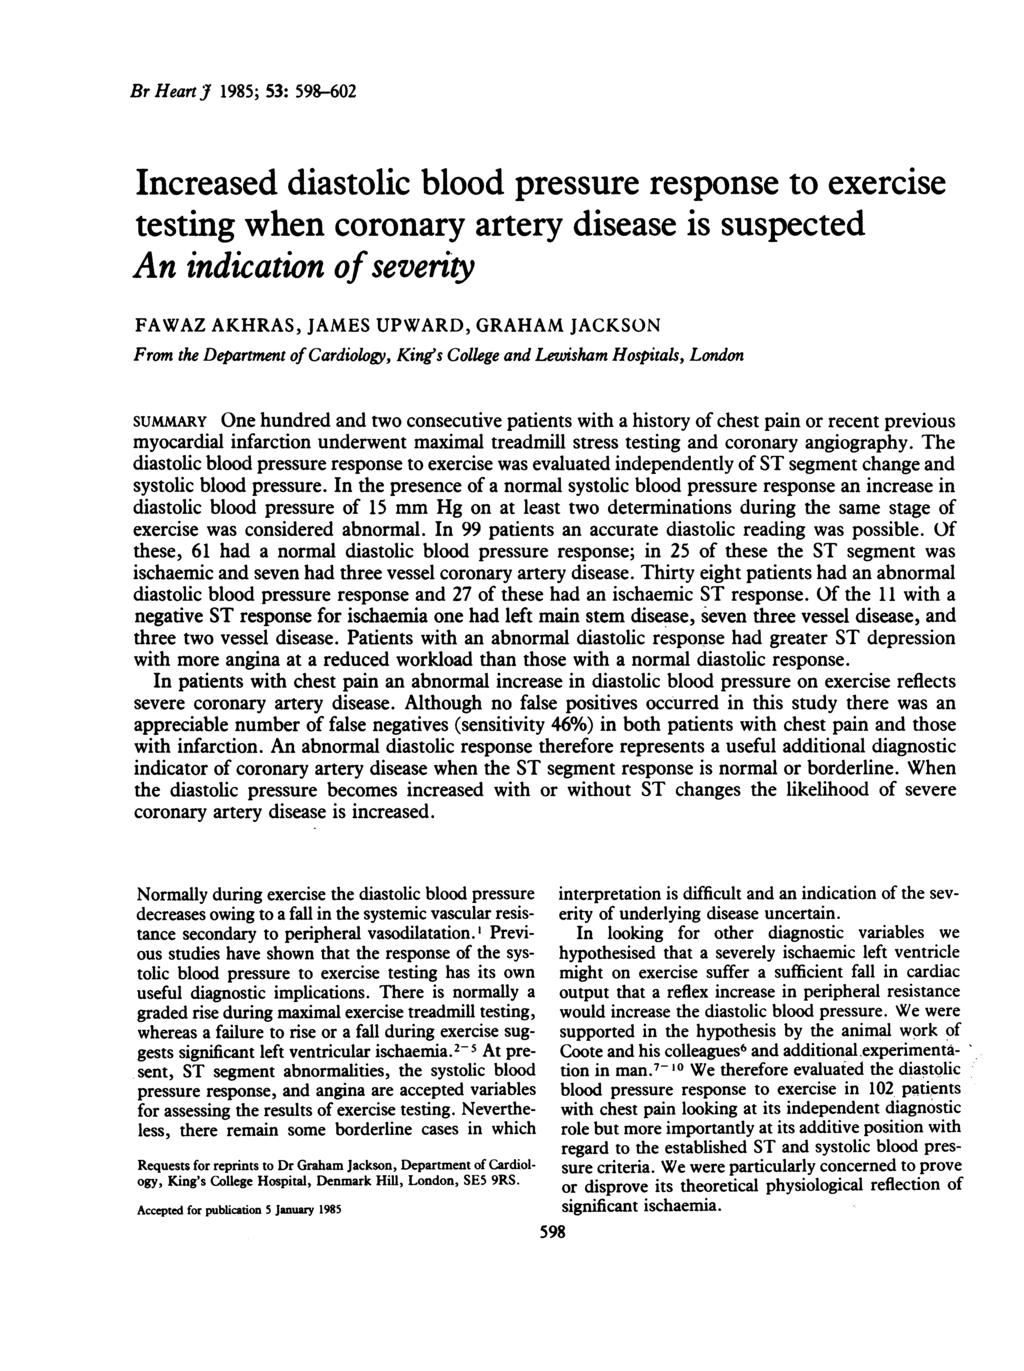 Br Heart j 1985; 53: 598-62 Increased diastolic blood pressure response to exercise testing when coronary artery disease is suspected An indication ofseverity FAWAZ AKHRAS, JAMES UPWARD, GRAHAM